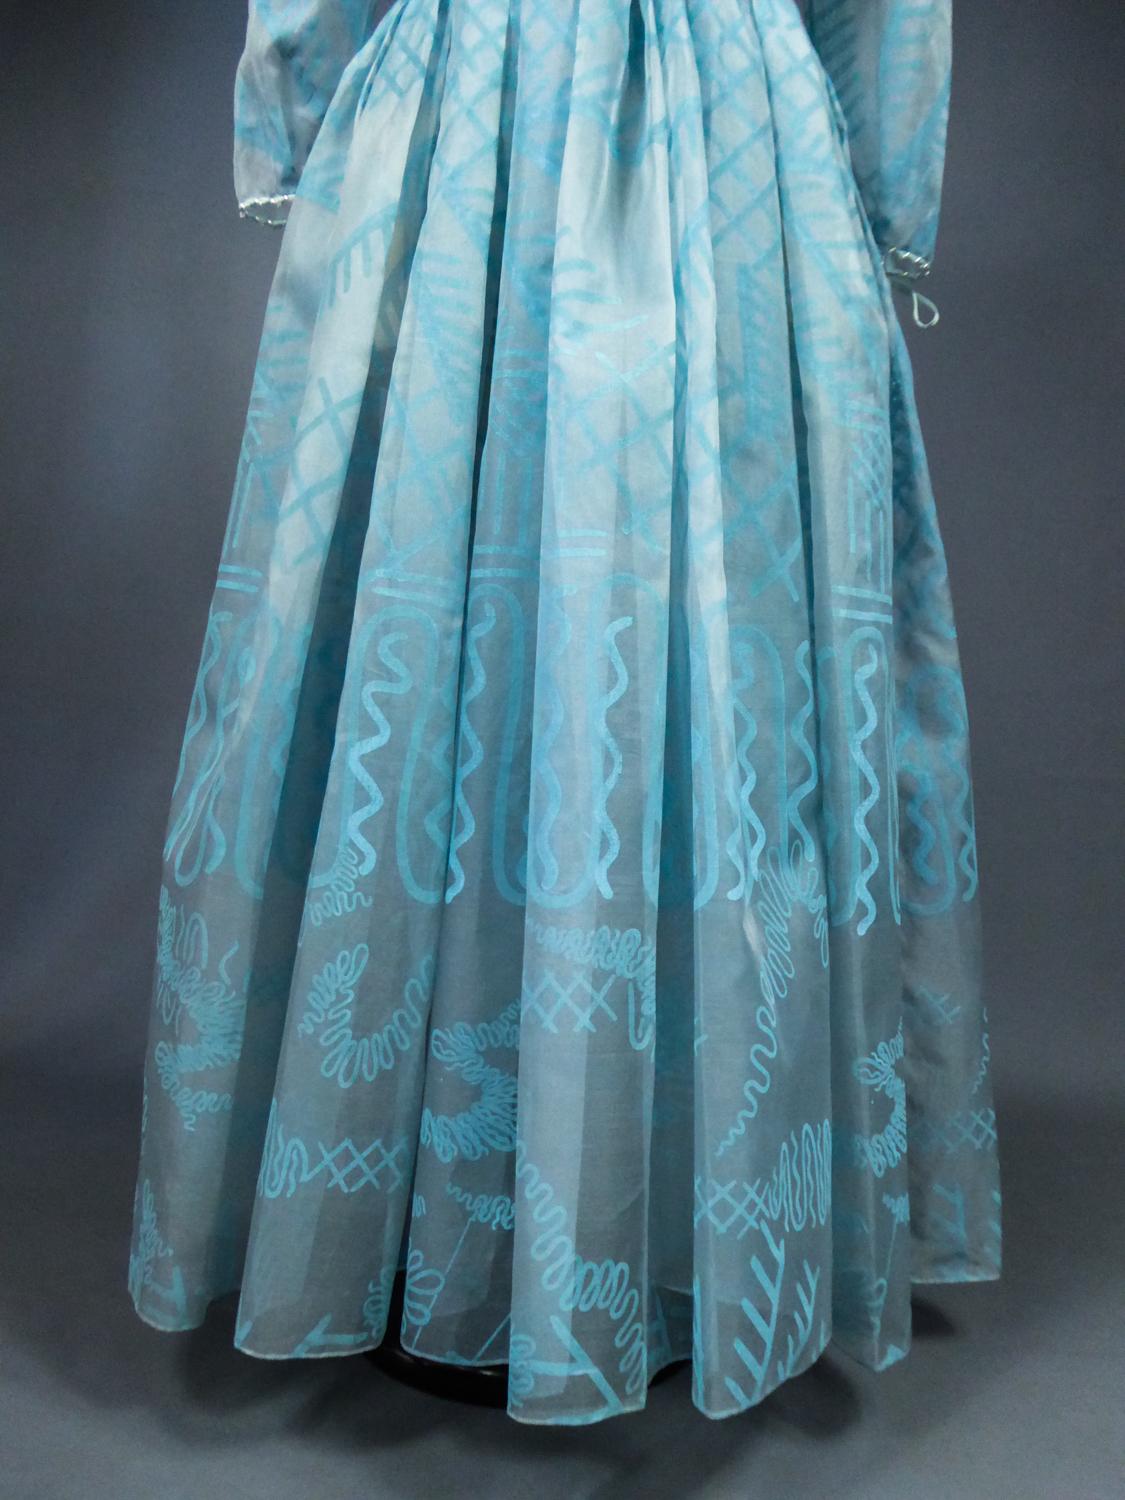 A Zandra Rhodes Evening Dress in Printed Organza - Fortuny Influence- Circa 1980 For Sale 4